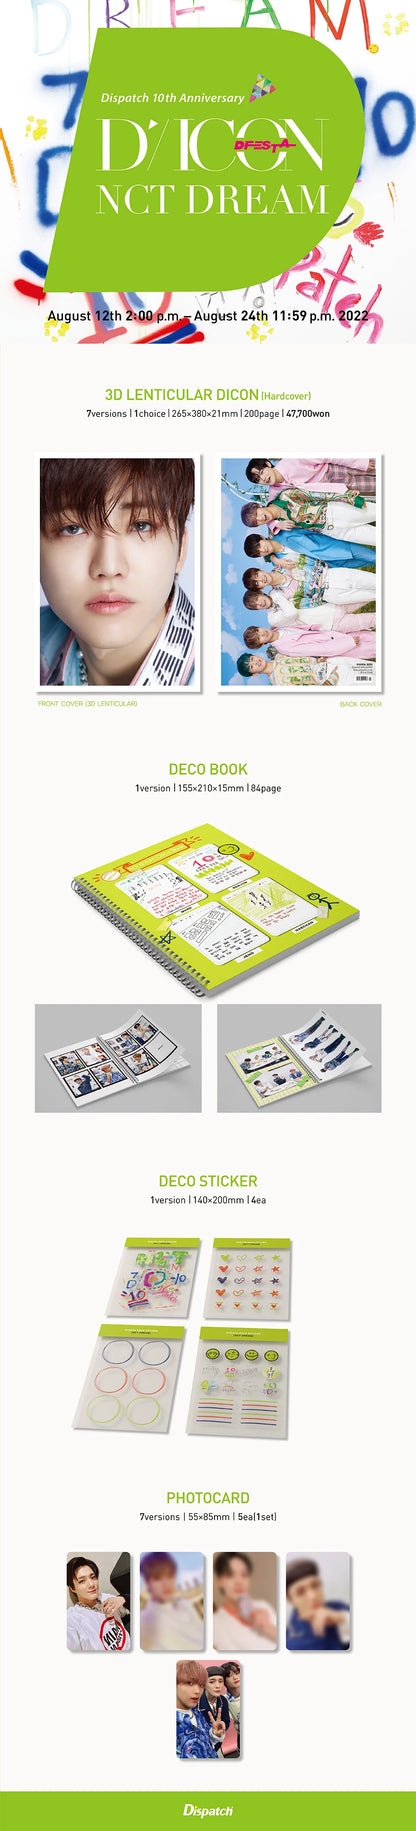 [IN-STORE PICKUP ONLY] NCT DREAM - DICON D'FESTA 10th Anniversary Photobook